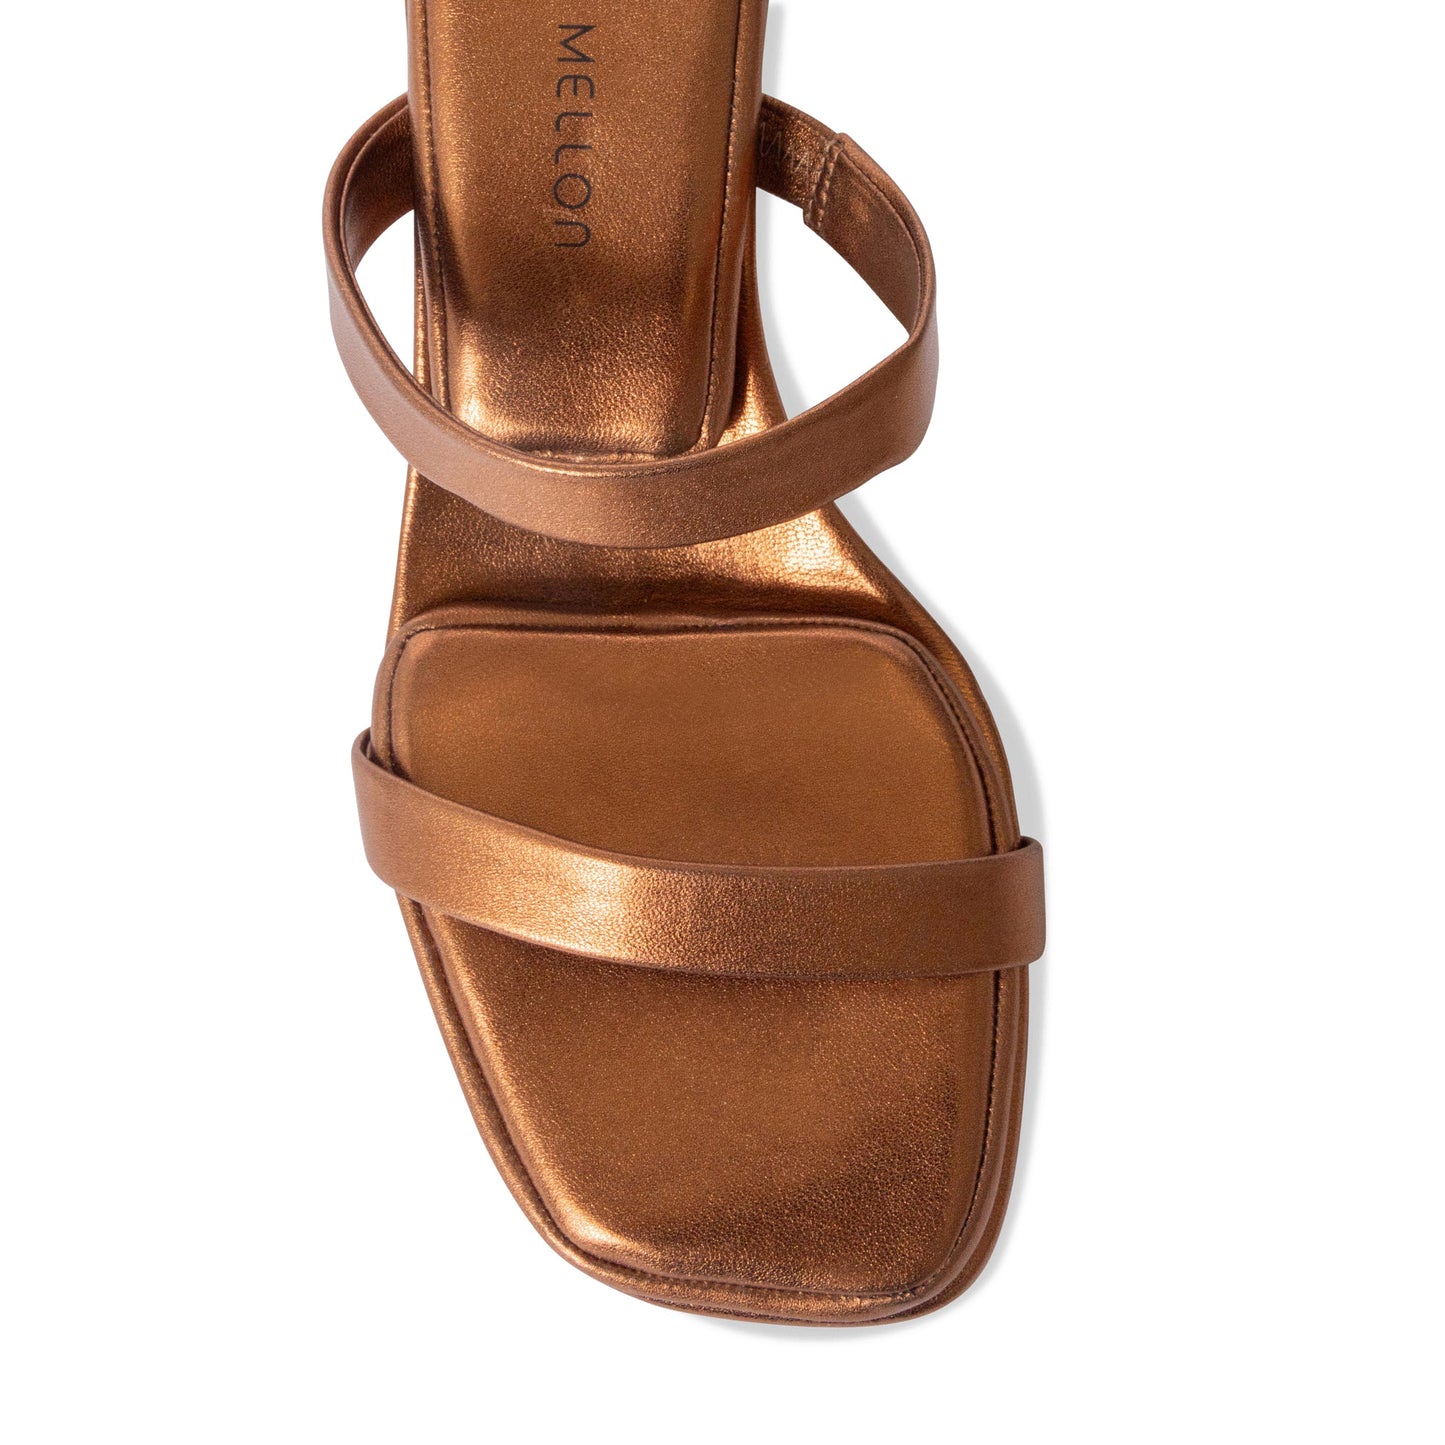 Absolute 40 Sandal in Bronze